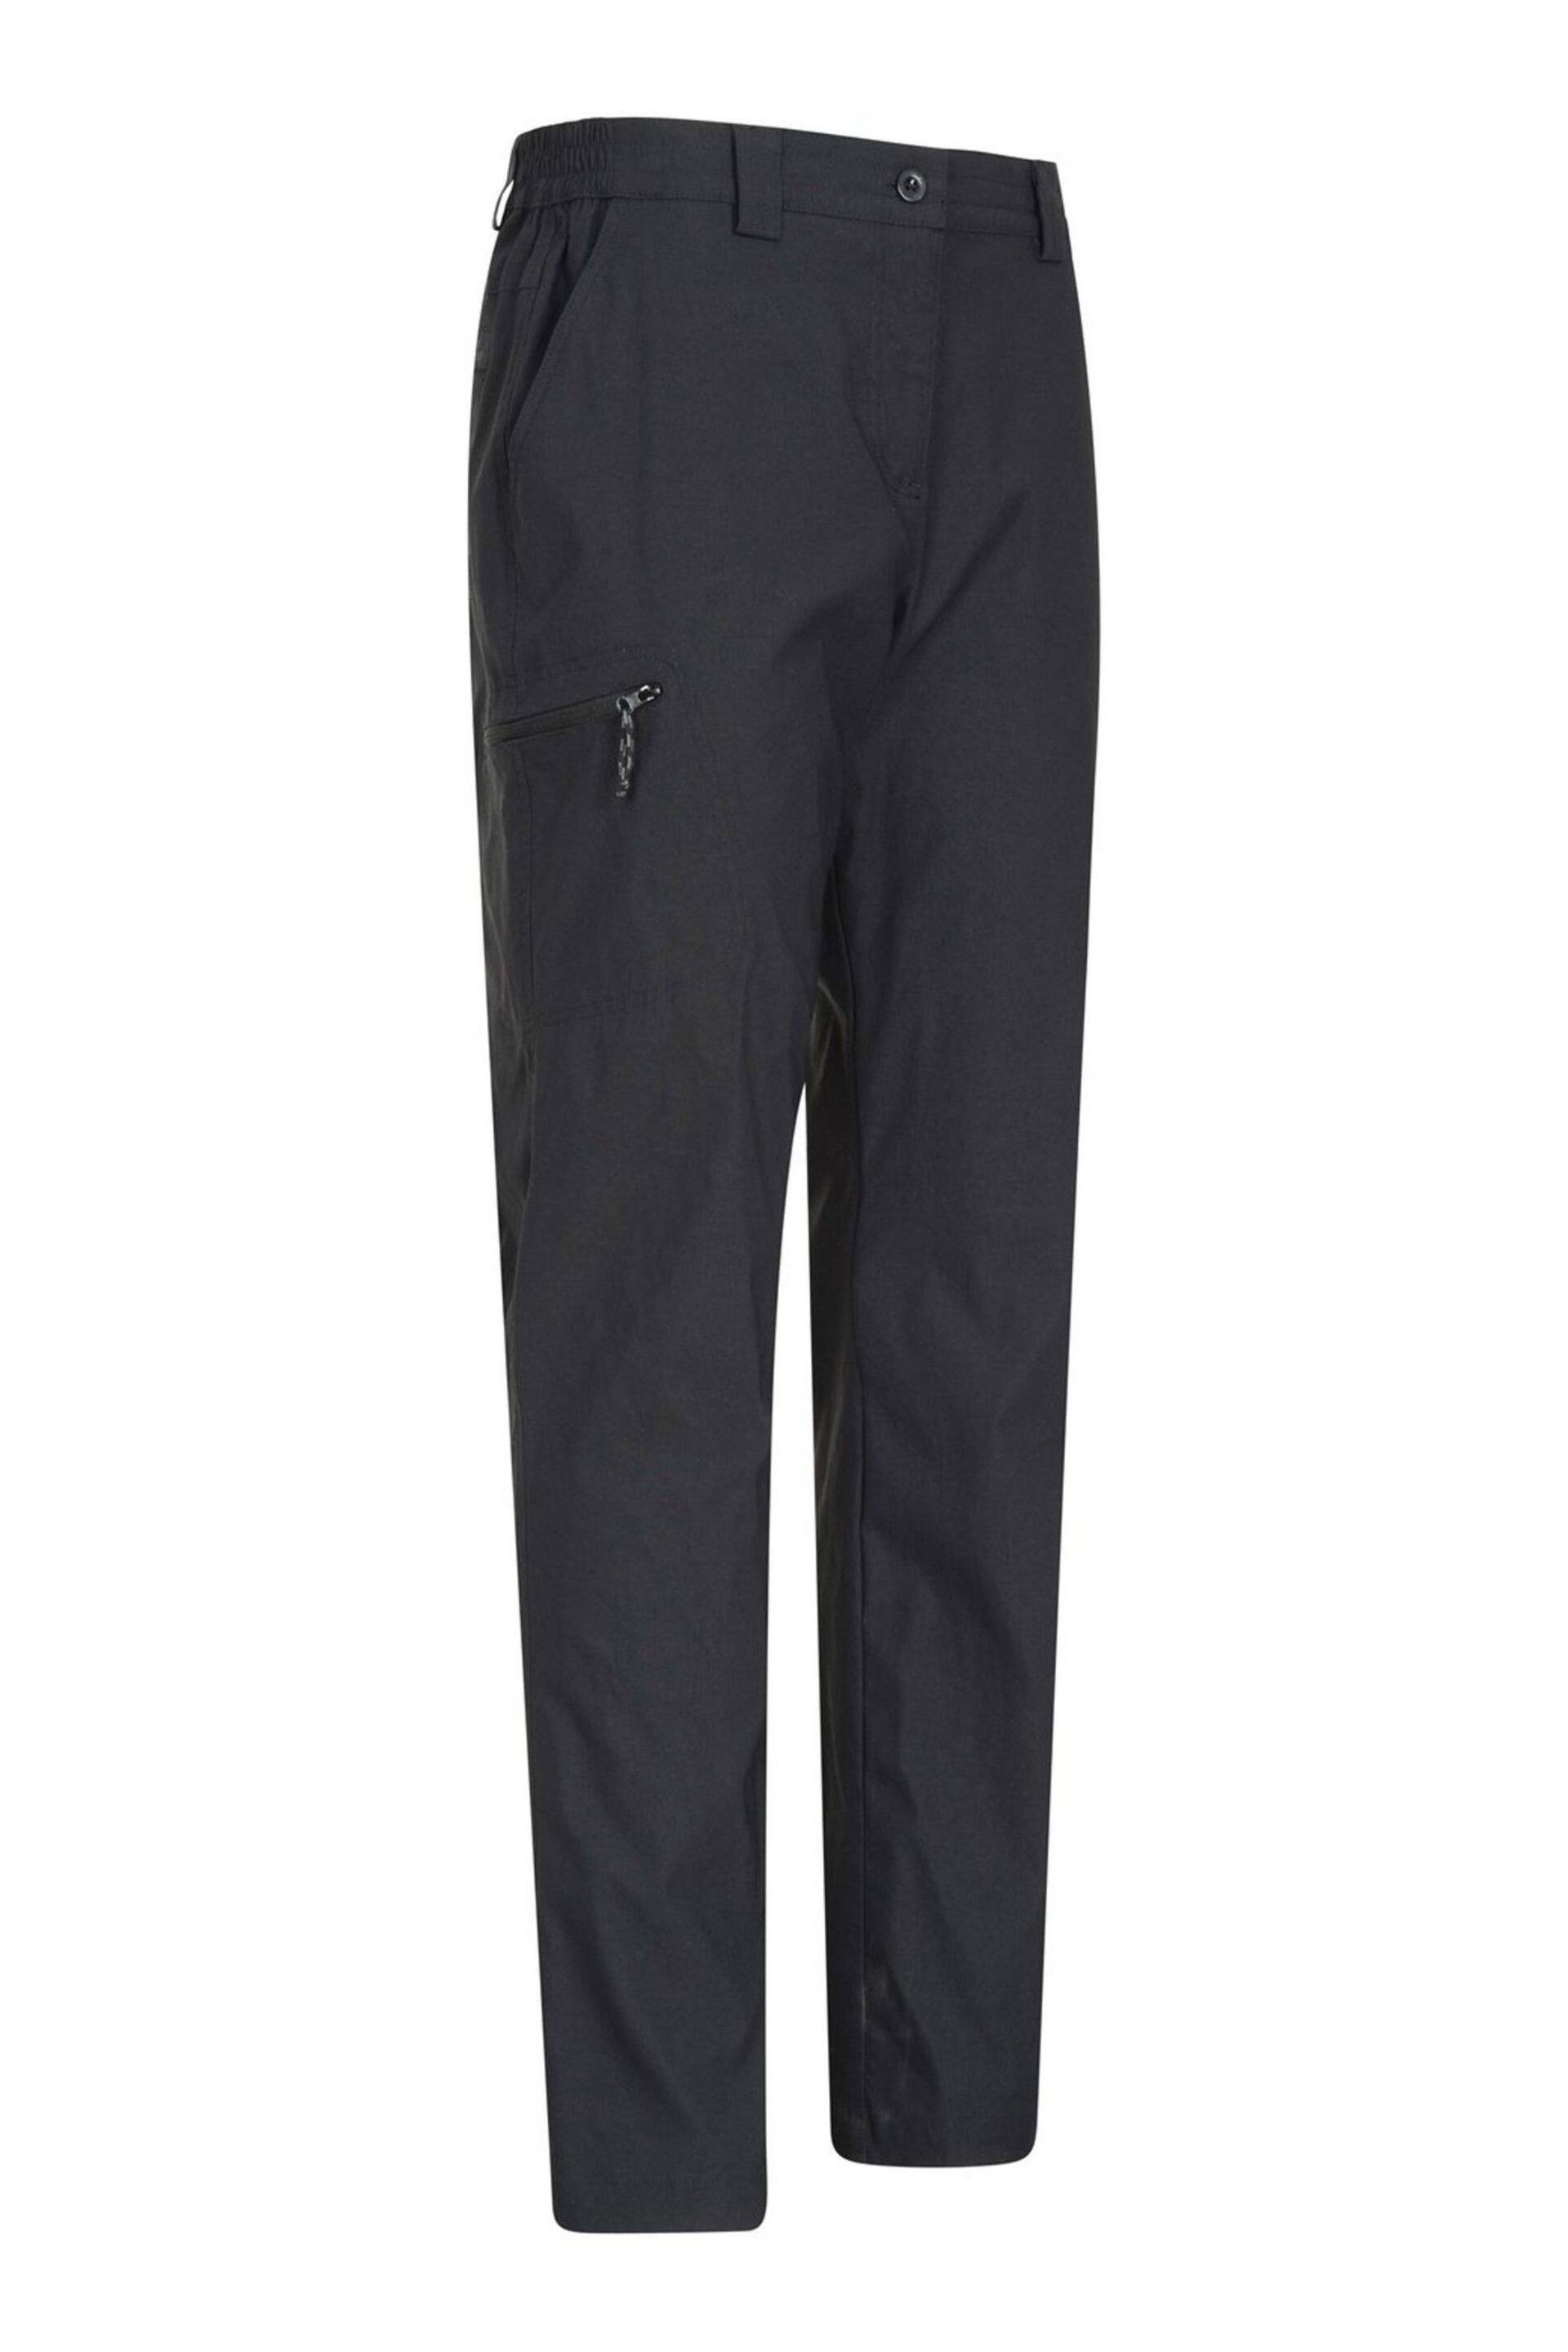 Mountain Warehouse Black Hiker Womens Lightweight Stretch, UV Protect Walking Trousers - Short Length - Image 2 of 4